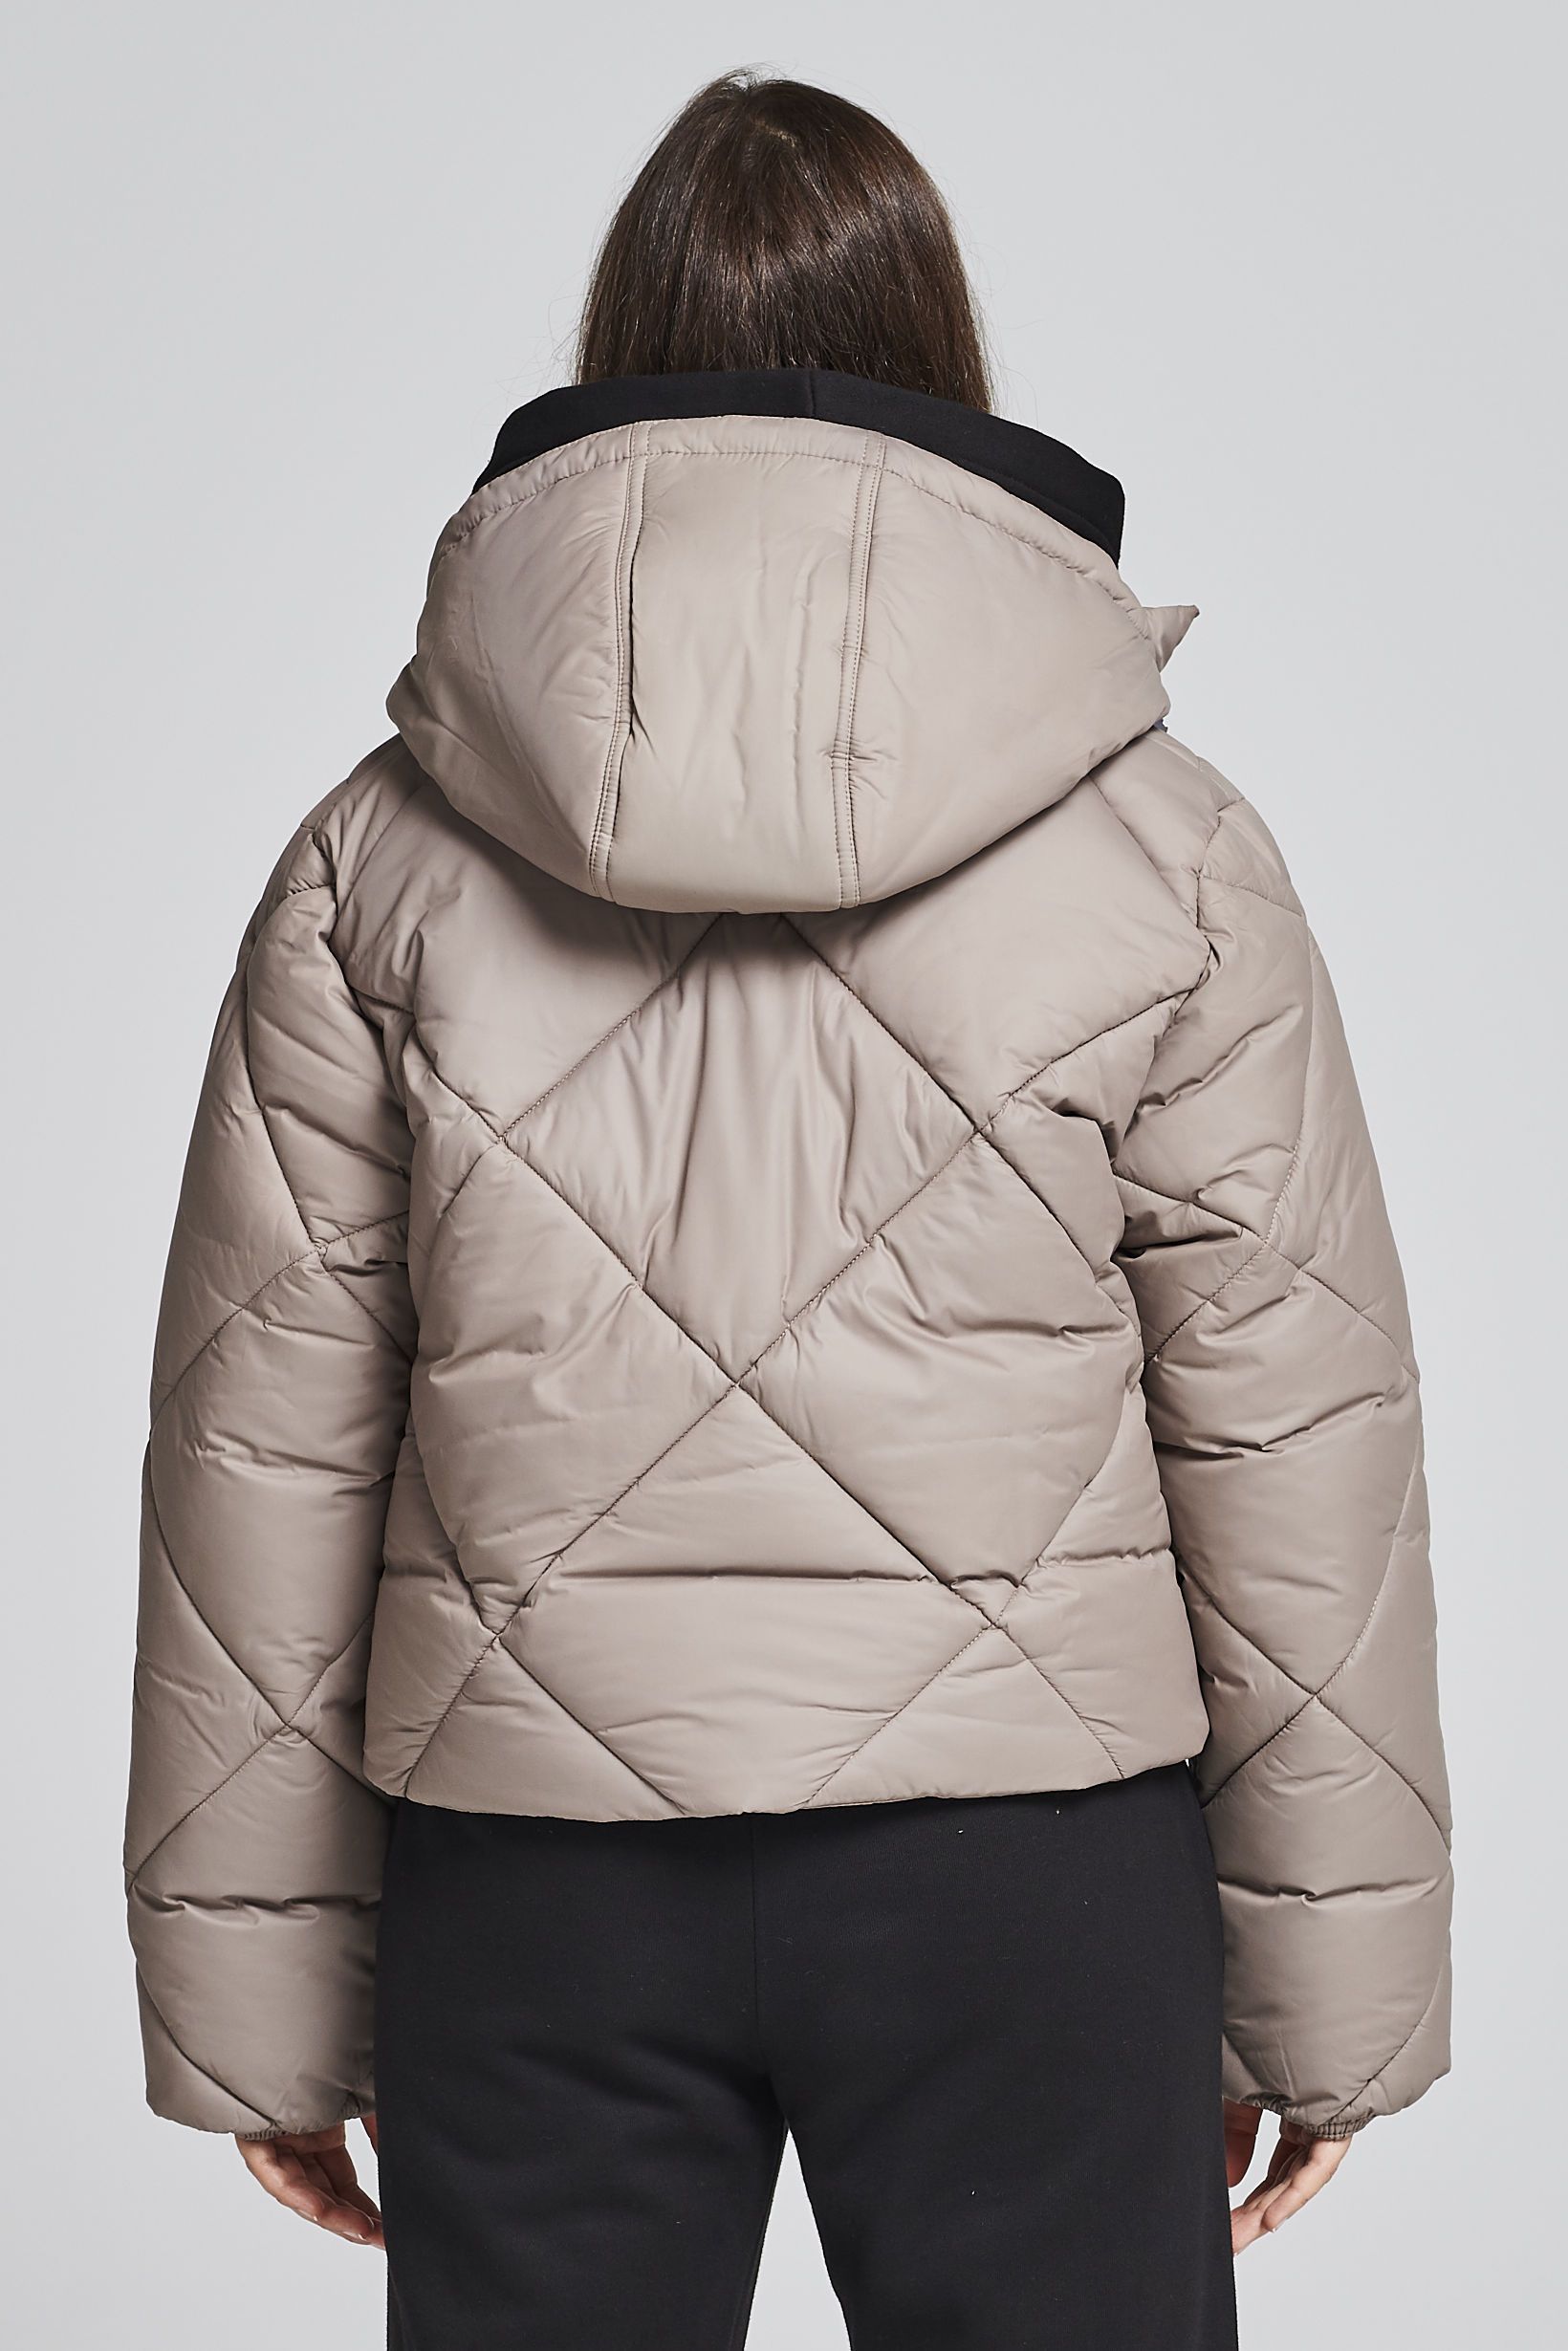 Pegador Pgdr-1195-001 MADISON HOODED PUFFER JACKET Taupe4